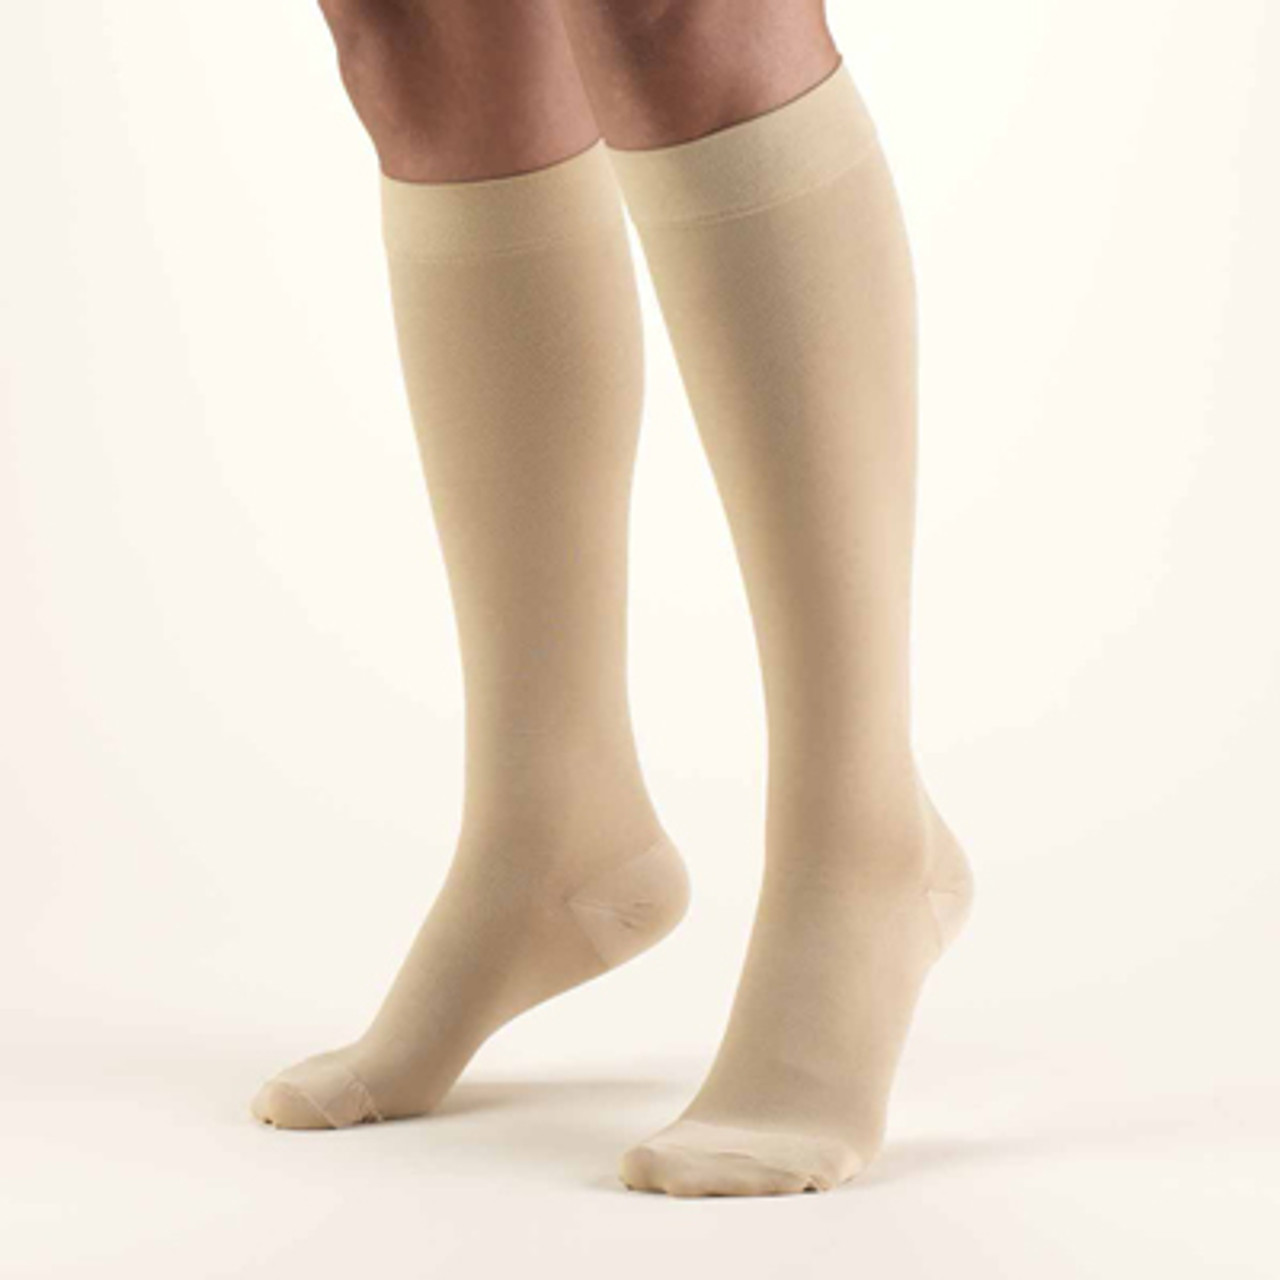 20-30 Knee High - Closed Toe - Compression Stockings